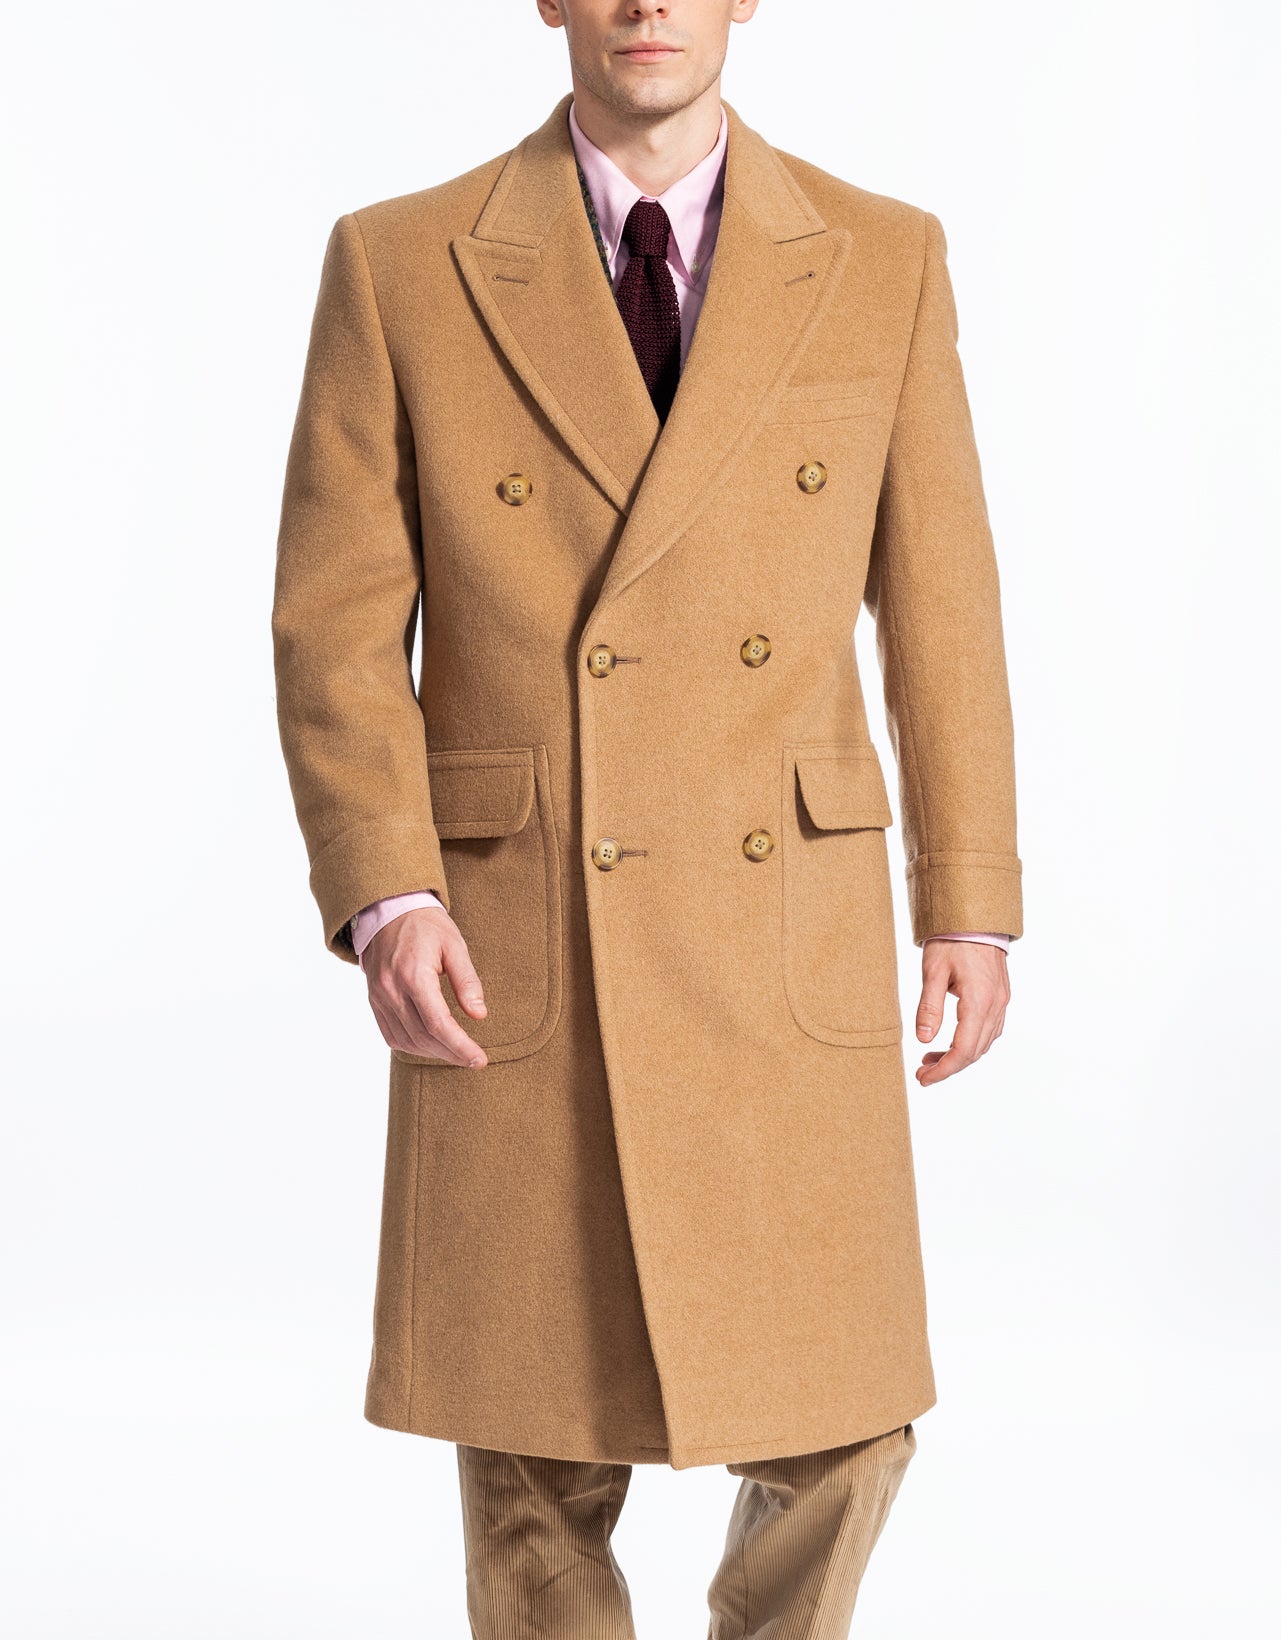 CAMEL HAIR DOUBLE BREASTED  POLO COAT